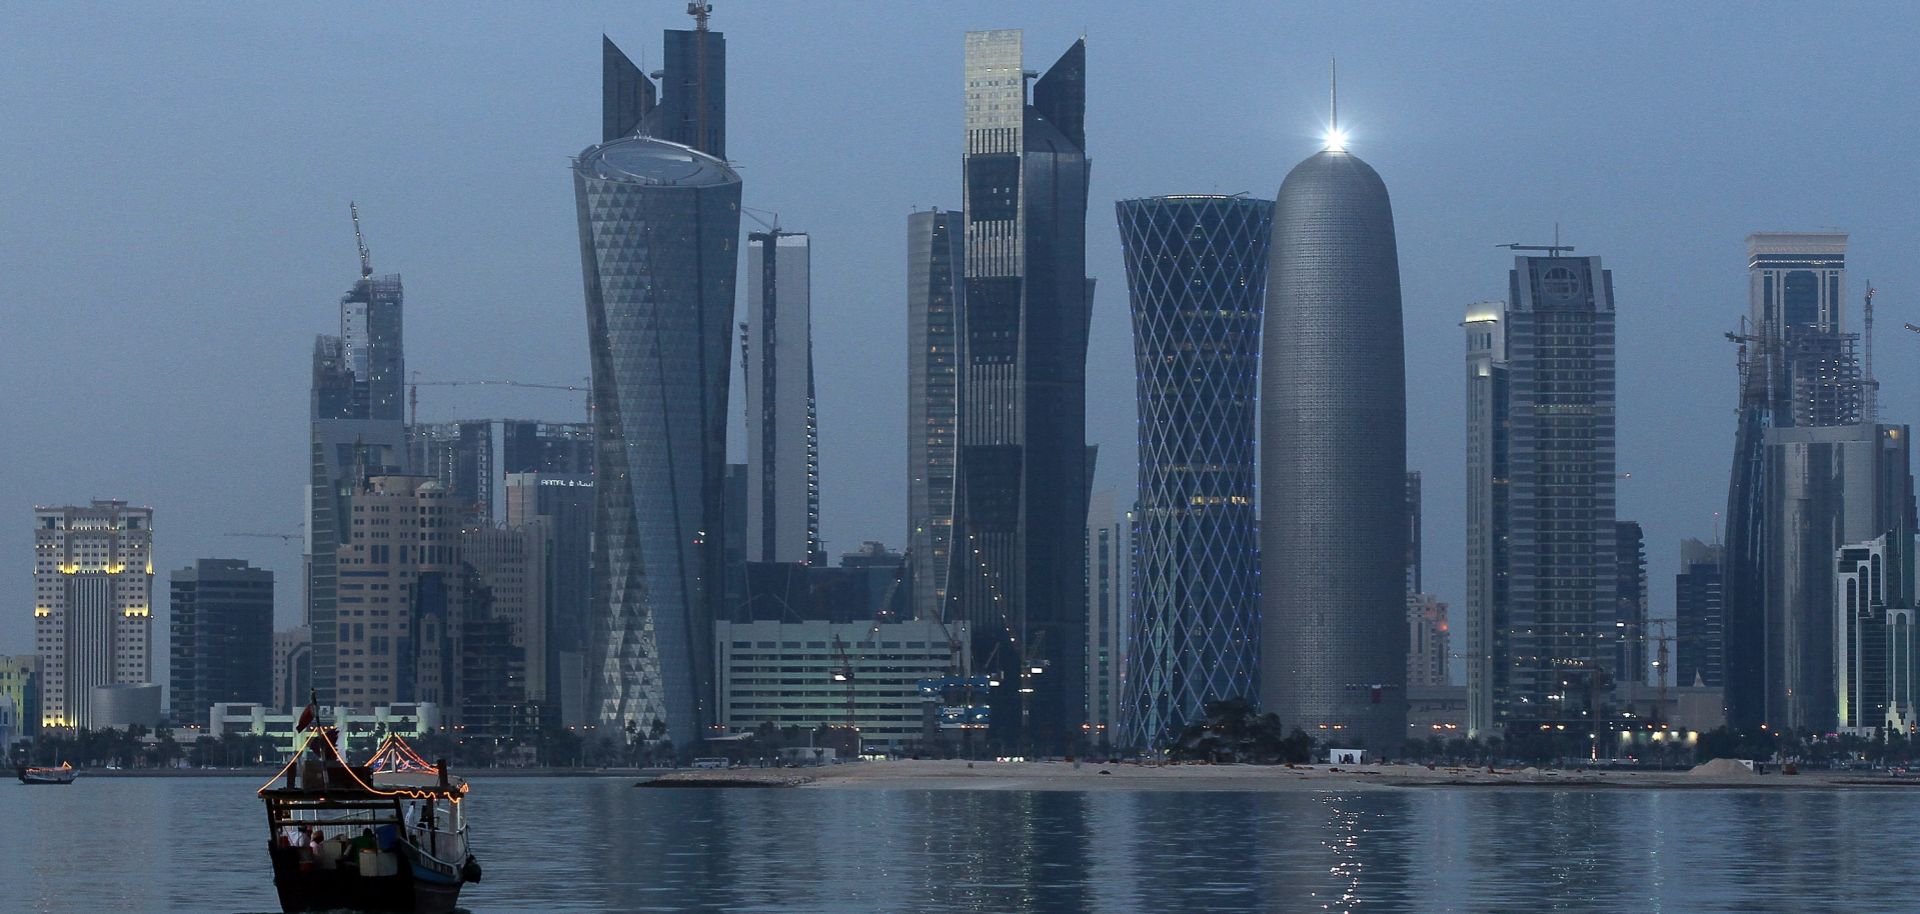 The peaceful view of Doha's skyline belies the turmoil that Qatar has experienced since Saudi Arabia, the United Arab Emirates, Bahrain and Egypt severed diplomatic and economic ties with the country.